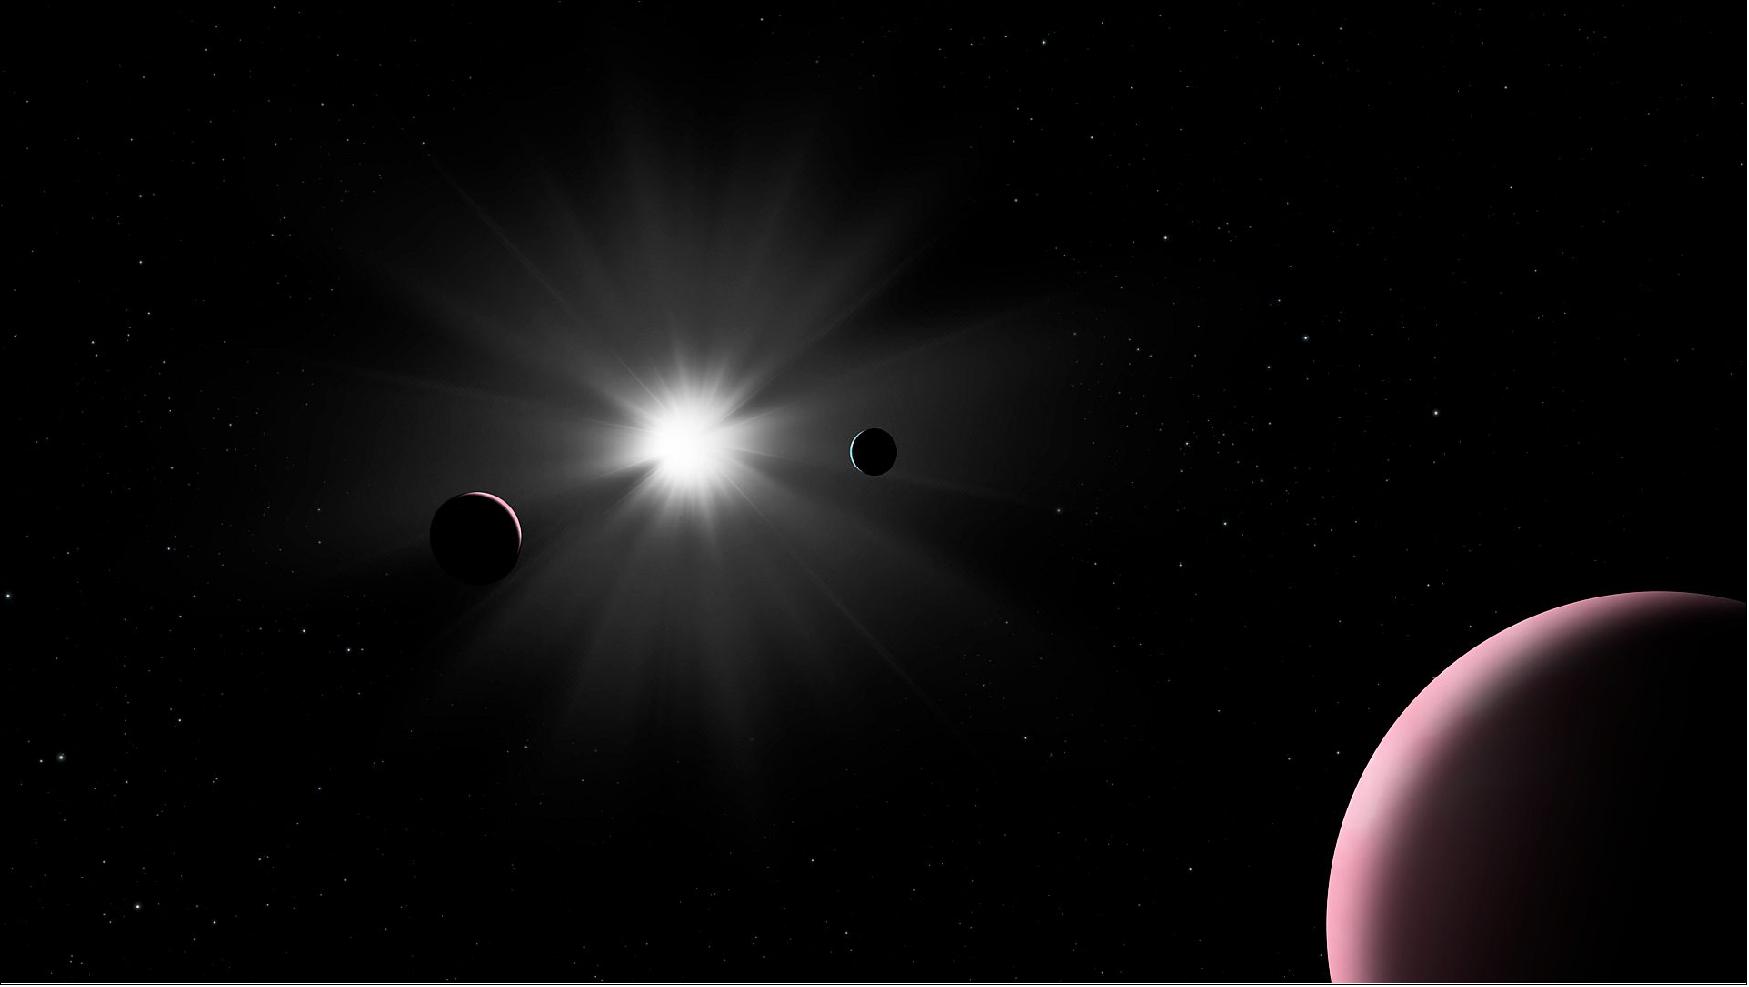 Figure 19: This artist’s impression shows the Nu2 Lupi planetary system, which was recently explored by ESA’s exoplanet watcher Cheops (CHaracterising ExOPlanet Satellite). This bright, Sun-like star is located just under 50 light-years away from Earth in the constellation of Lupus (the Wolf), and is known to host three planets – named ‘b’, ‘c’ and ‘d’, with the star deemed to be object ‘A’ – with masses between those of Earth and Neptune and orbital periods lasting 11.6, 27.6 and just over 107 days. The inner two of these planets were found to cross the face of their star as seen from Earth, an event known as a transit. Transits create the valuable opportunity to study a planet’s atmosphere, orbit, size and interior, and allow scientists to compare multiple planets around the same star to understand how they have formed and evolved over time. - While exploring these two transiting planets, Cheops spied something unexpected and exciting: the third and outermost planet, Nu2 Lupi d, also completing a transit. The discovery is one of the first results from Cheops, and the first time an exoplanet with a period of over 100 days has been spotted transiting a star bright enough to be visible to the naked eye (image credit: ESA)